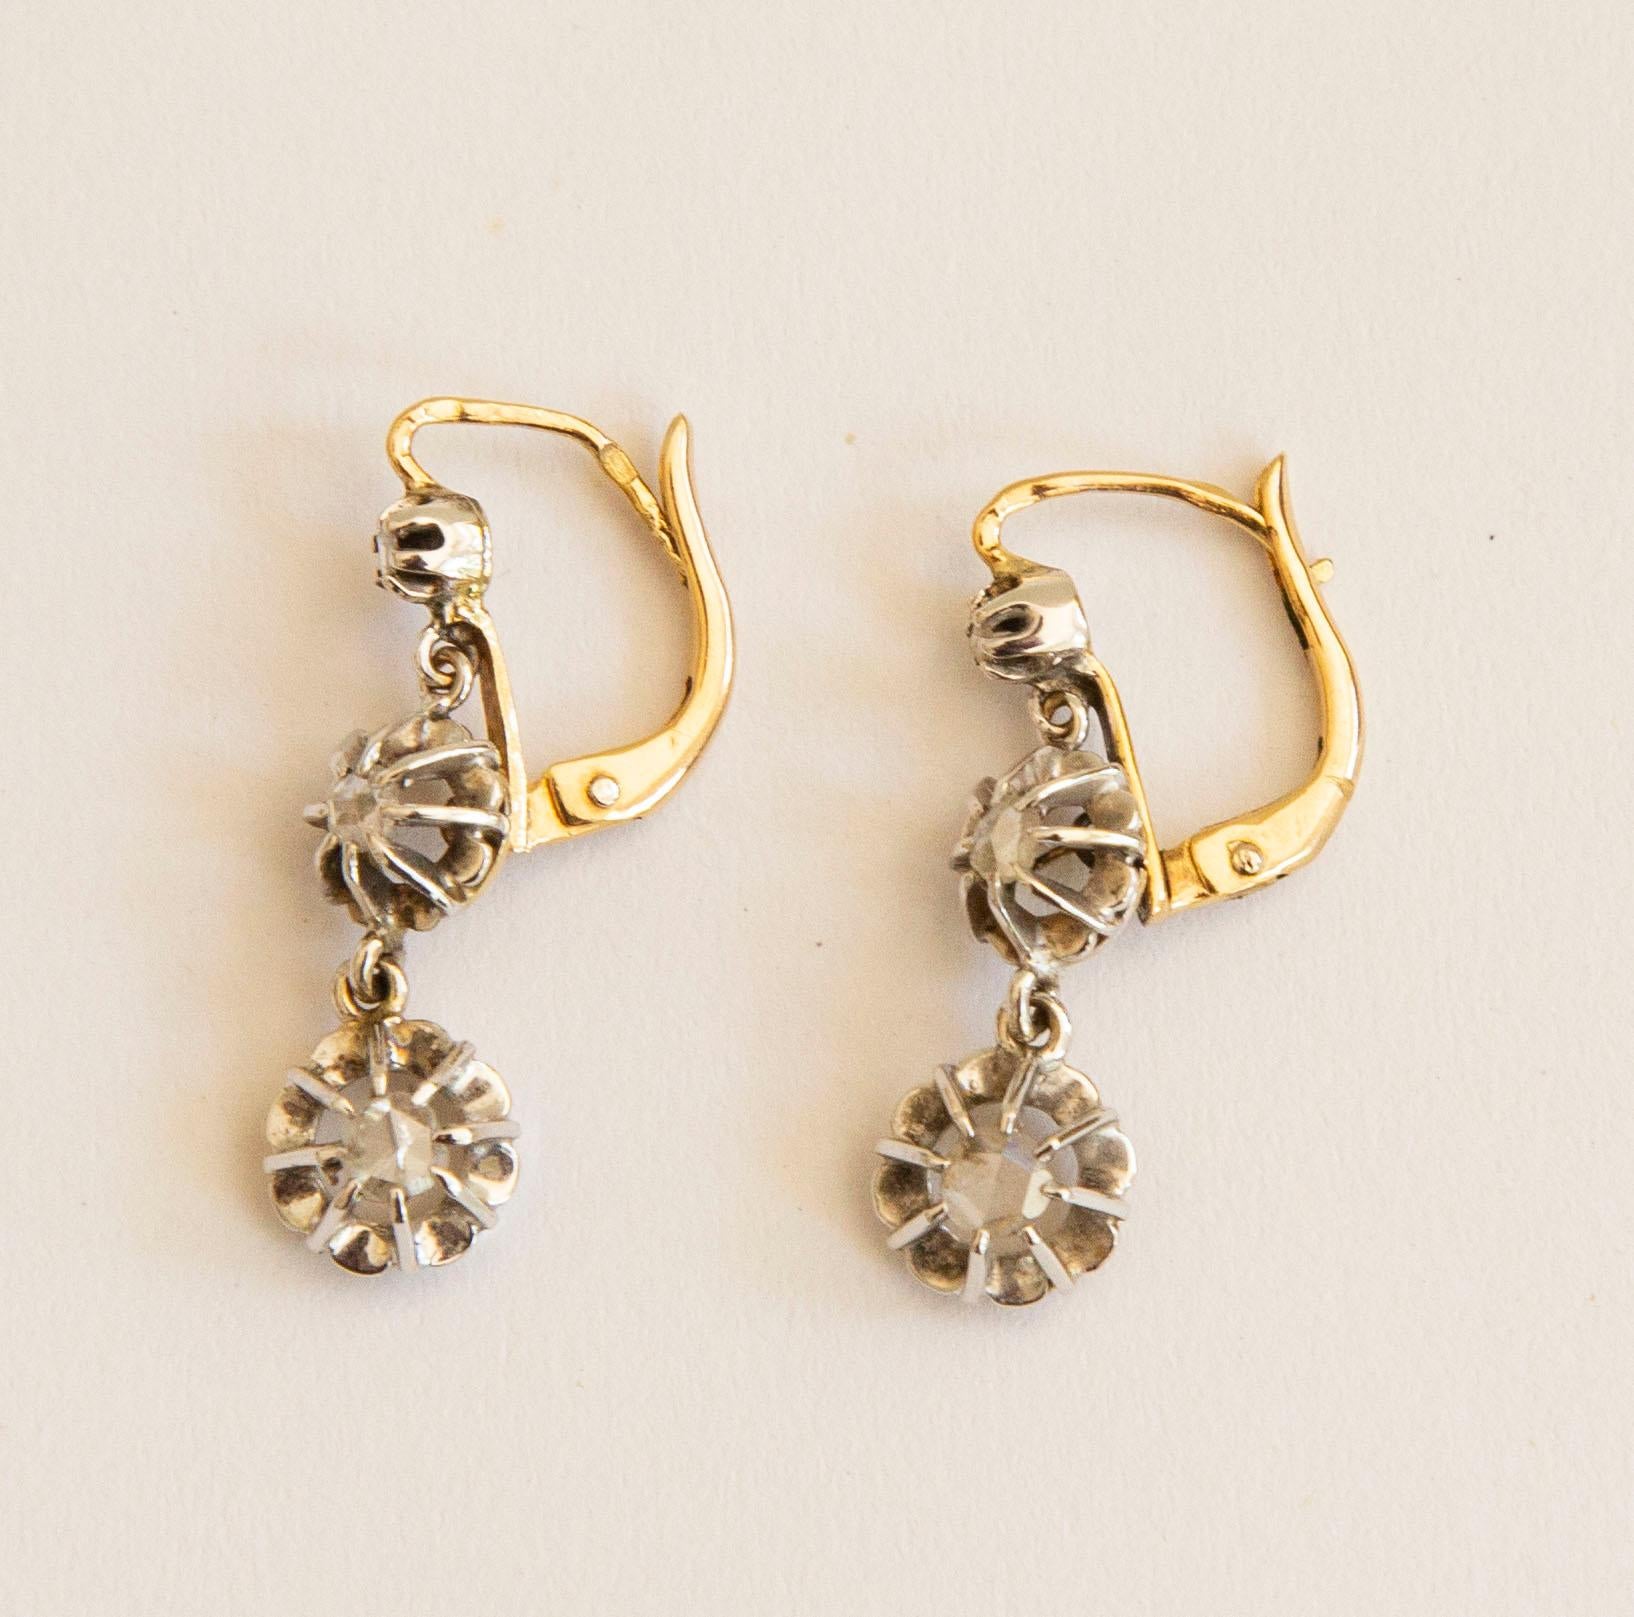 Antique Victorian Pair of 14 Karat Gold Drop Earrings with Rose Cut Diamonds In Good Condition For Sale In Arnhem, NL